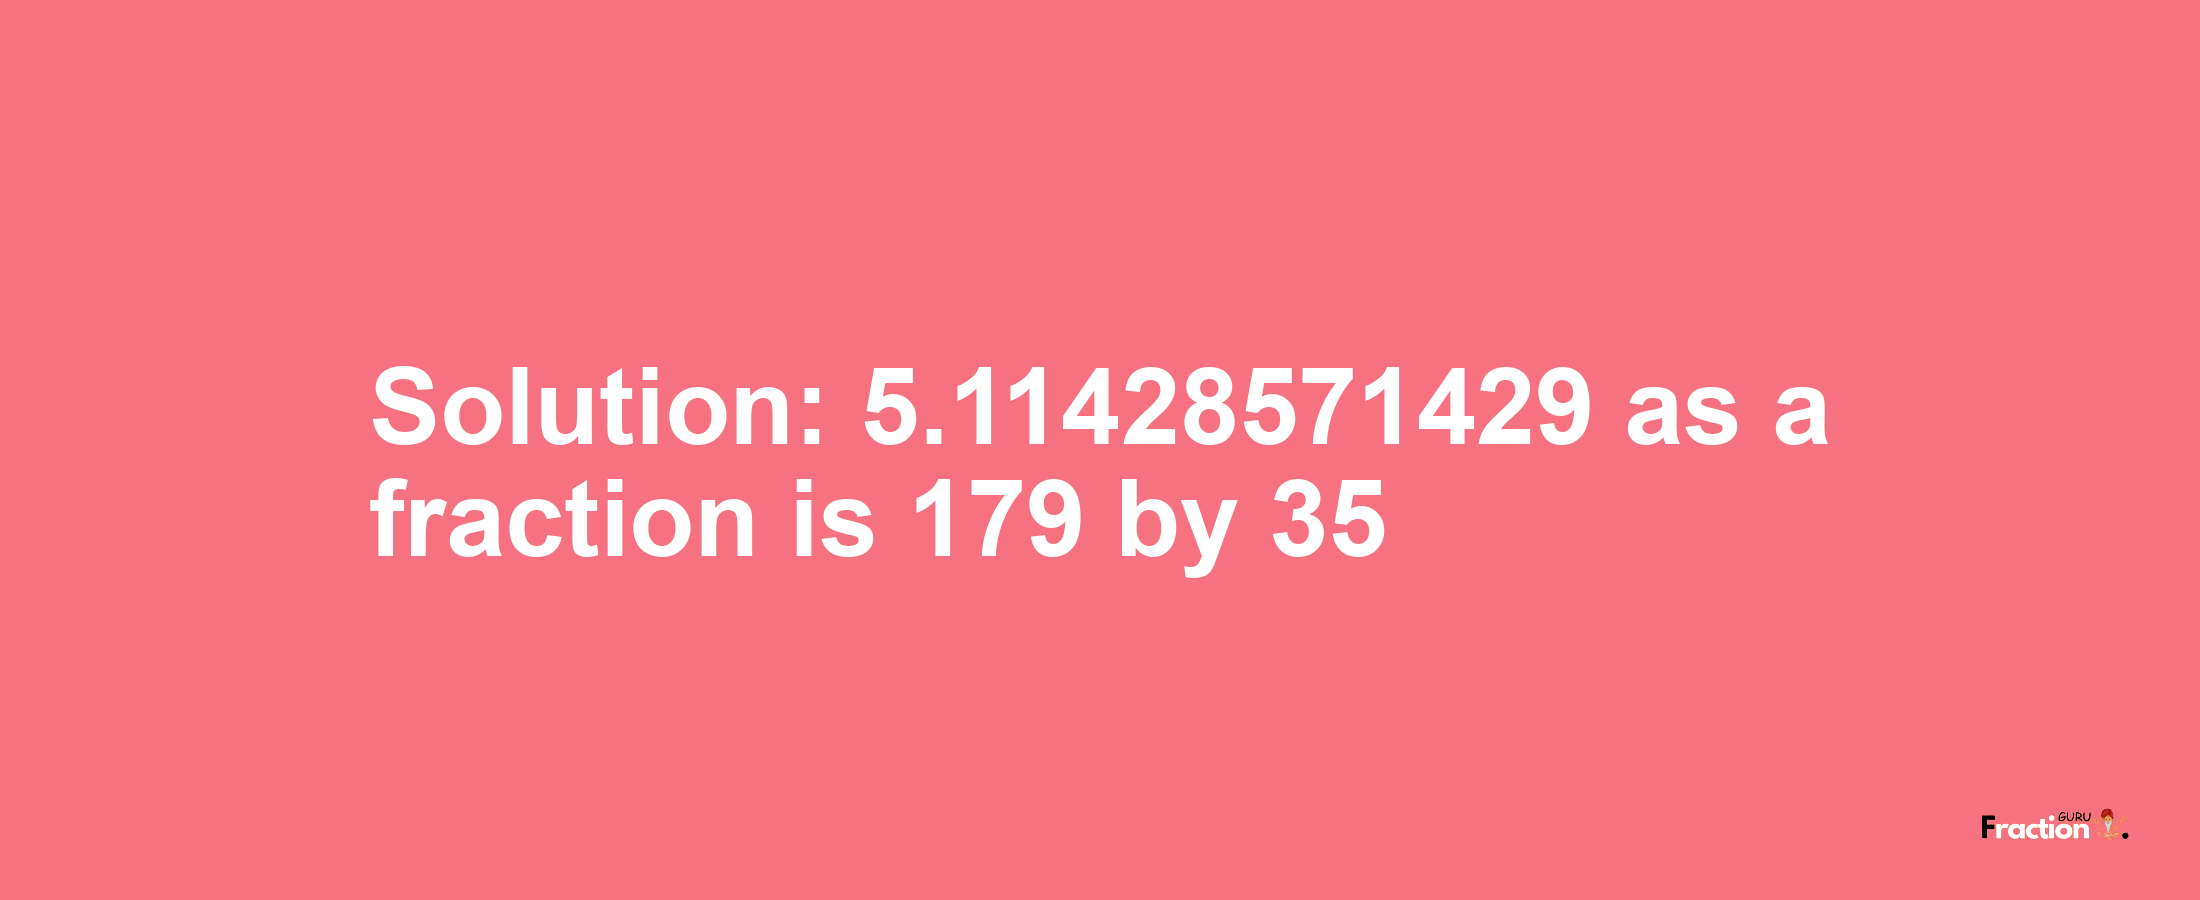 Solution:5.11428571429 as a fraction is 179/35